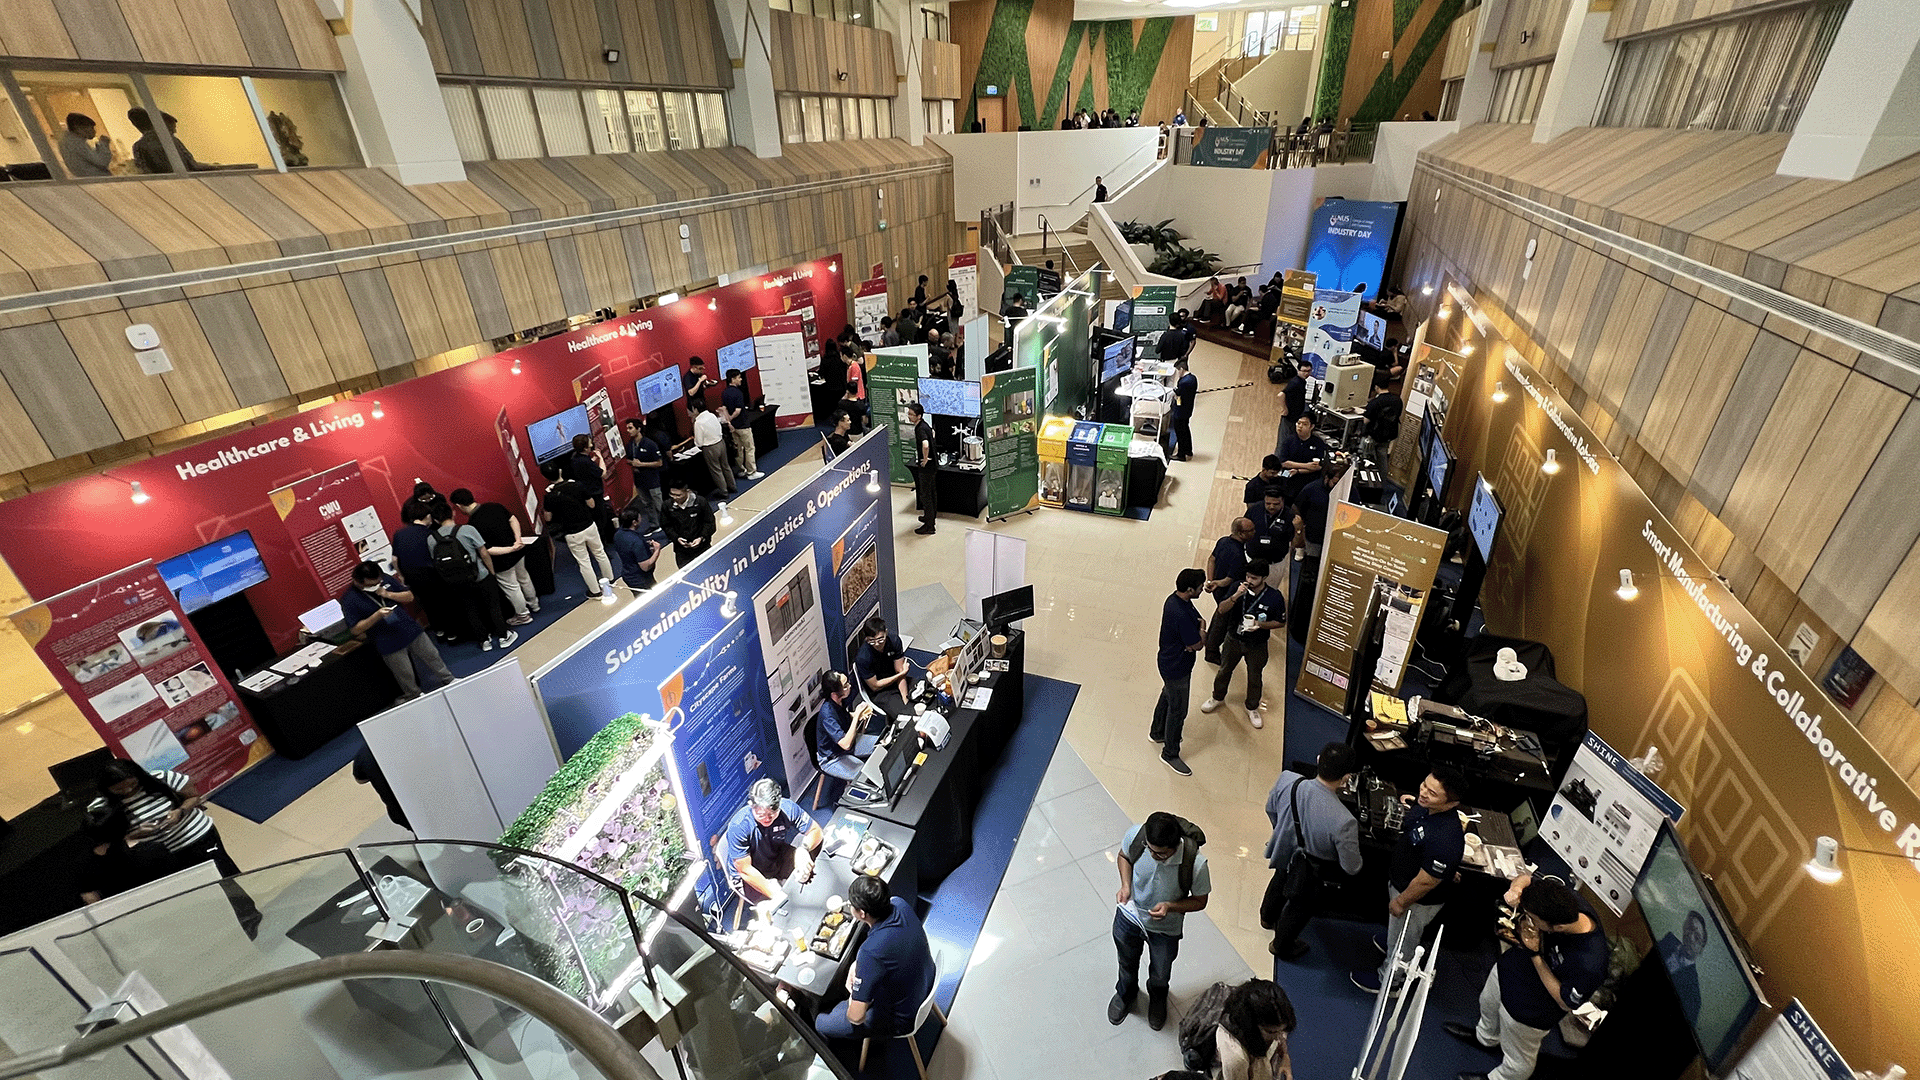 Exhibits at Industry Day showcased some of the latest research and innovation by CDE faculty and students.